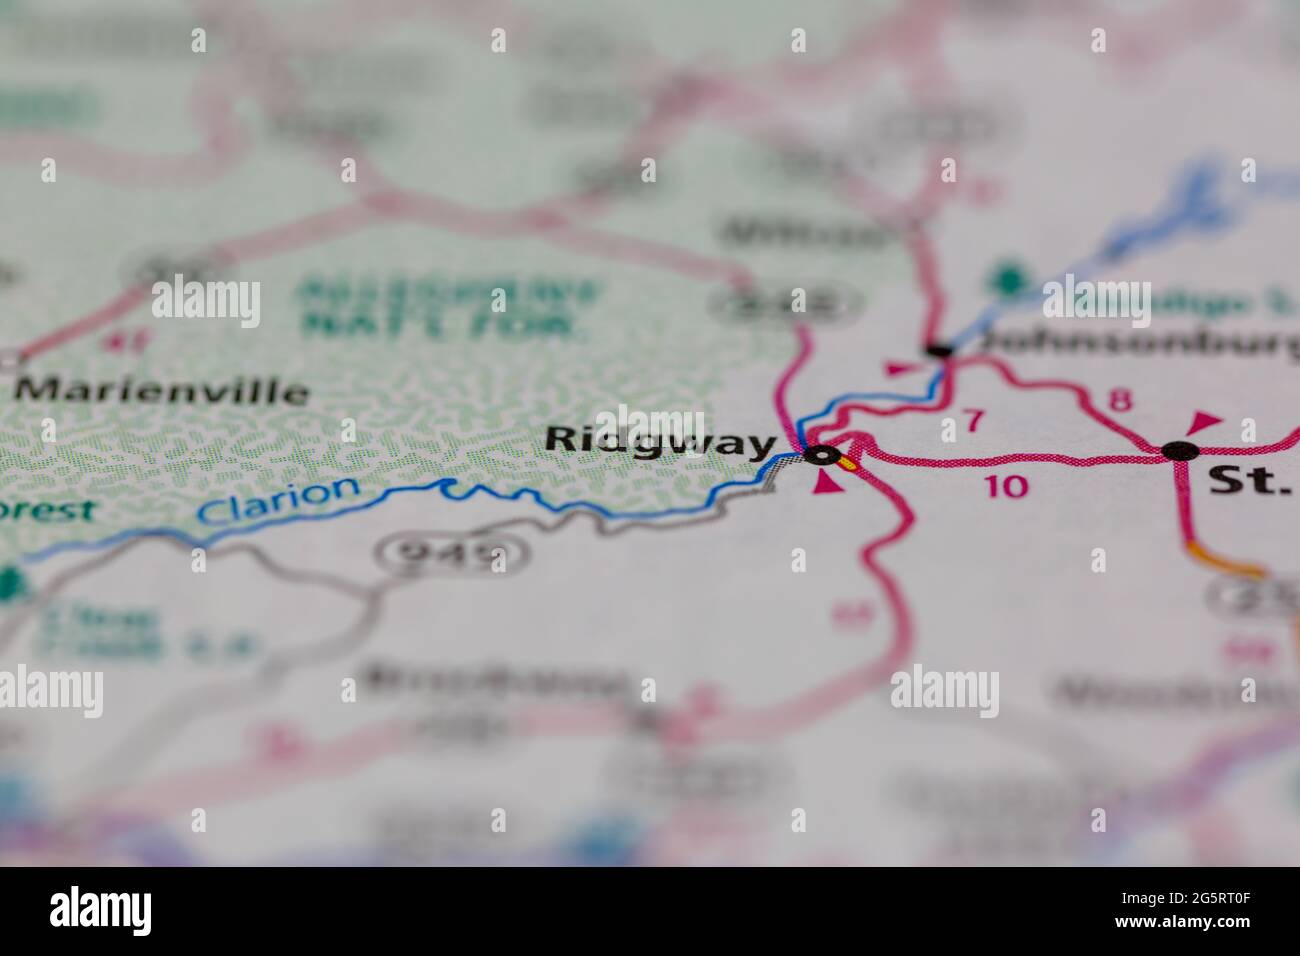 Ridgway Pennsylvania USA shown on a Geography map or Road map Stock Photo